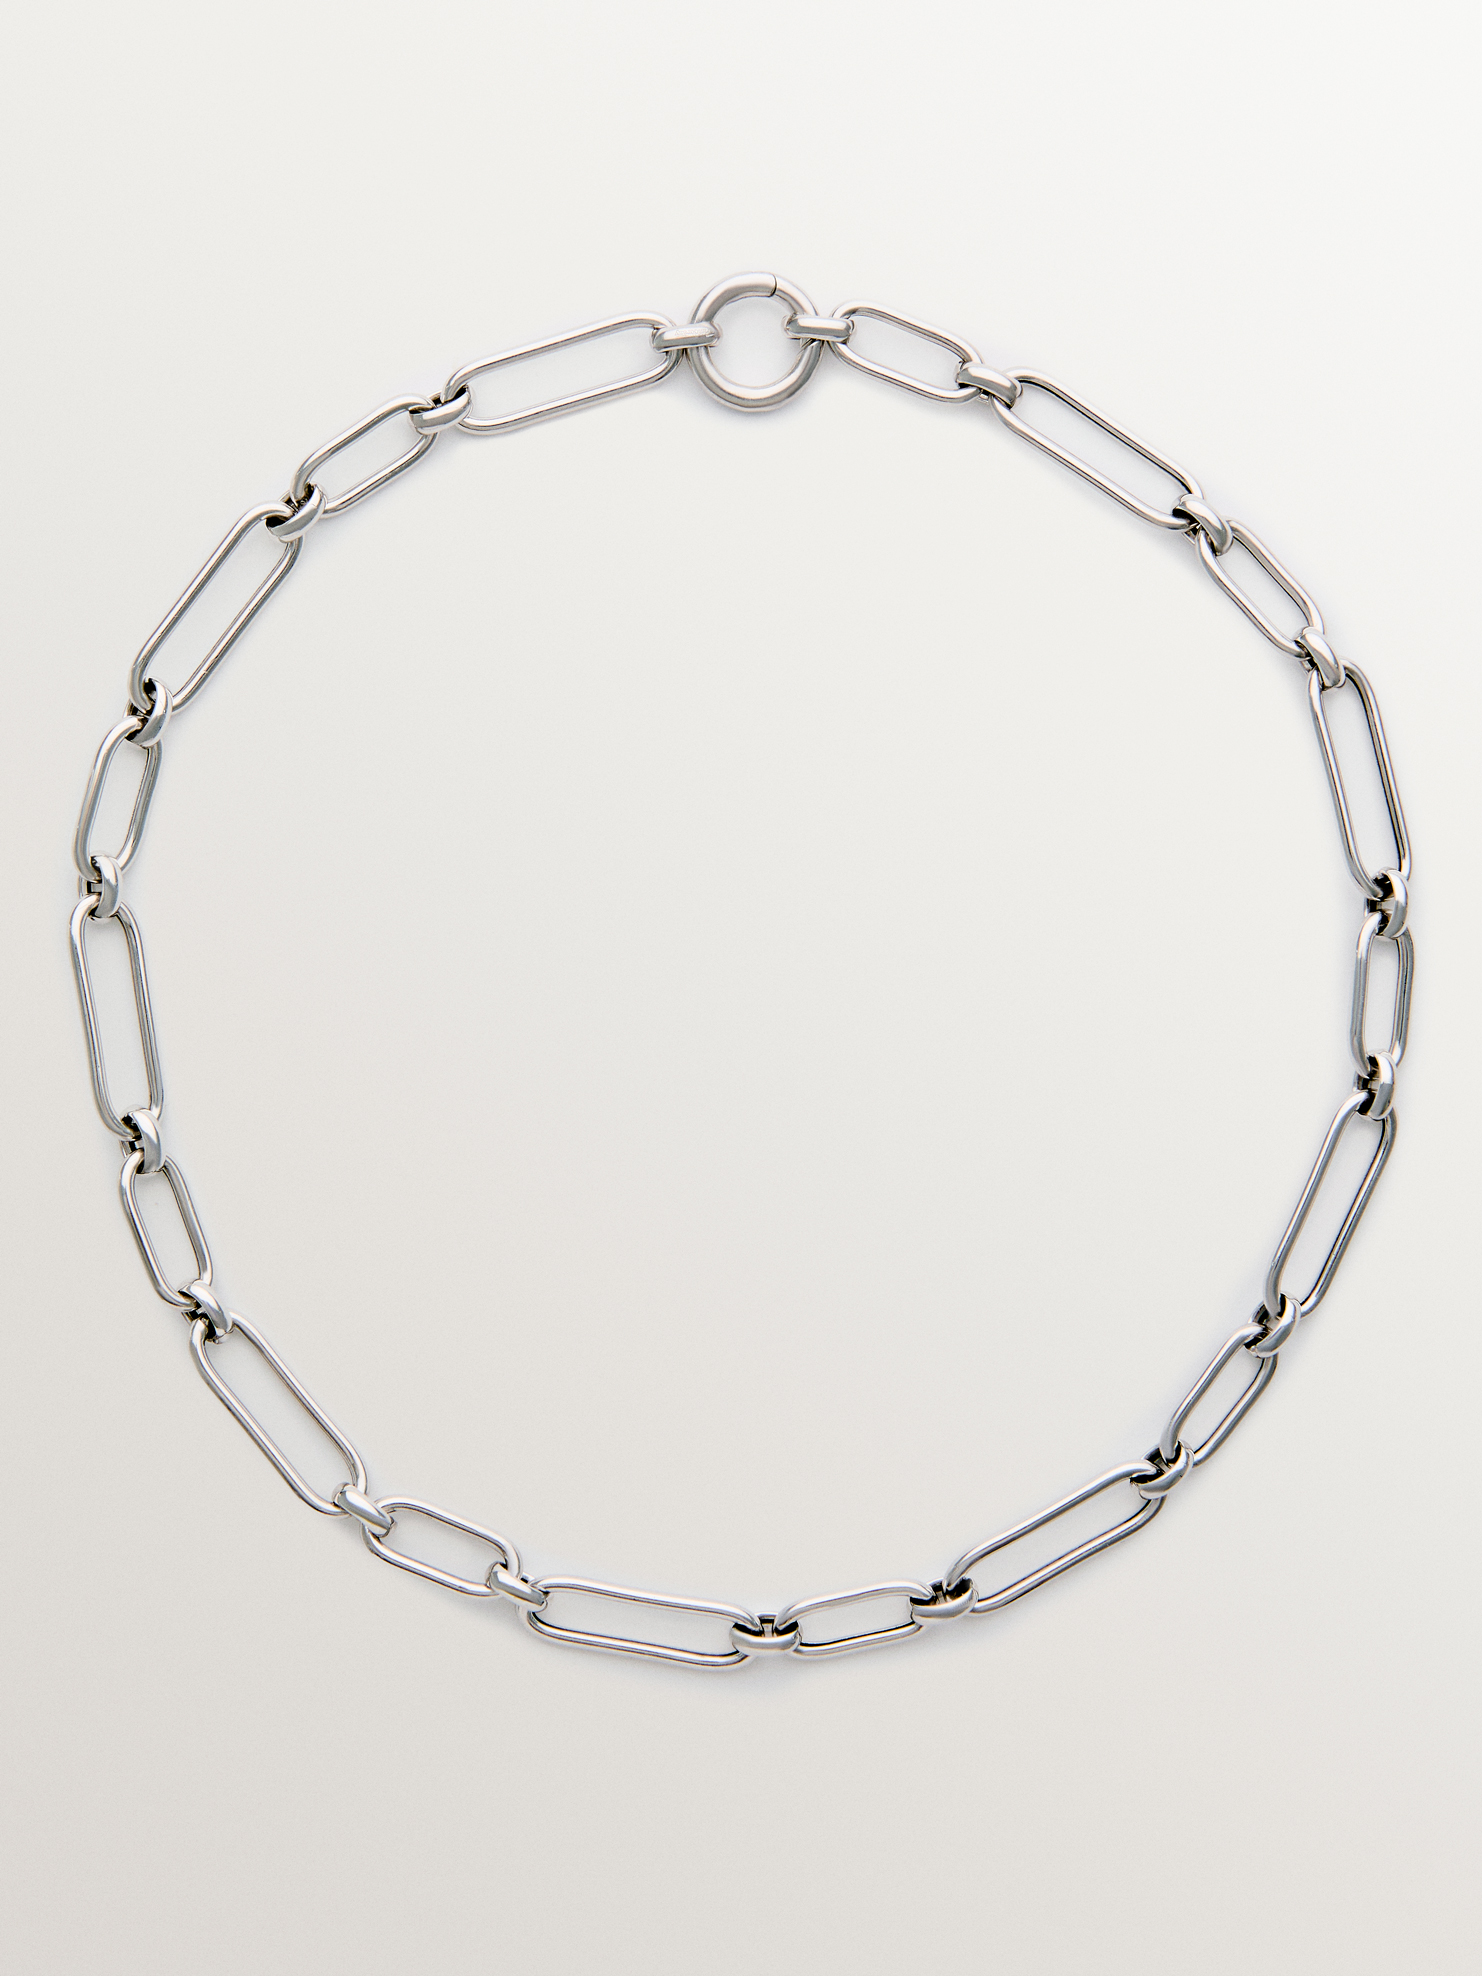 925 silver chain with rectangular links